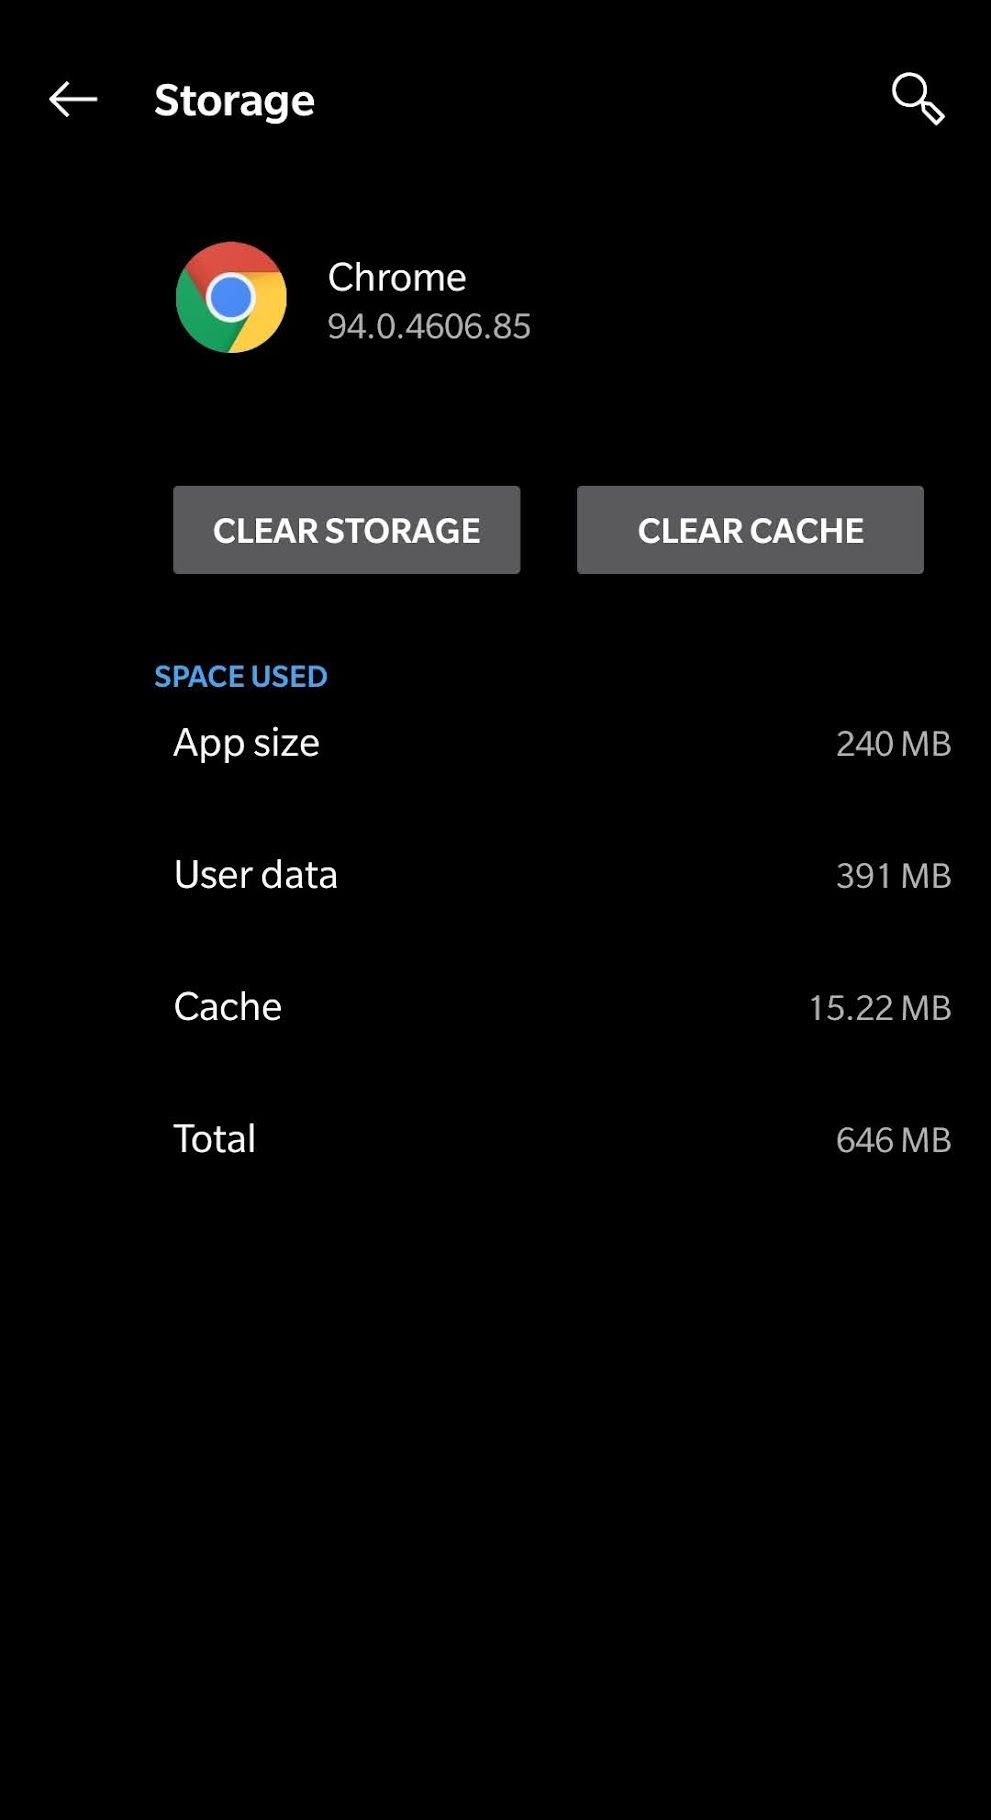 Chrome storage information on Android phone with Clear Cache option.